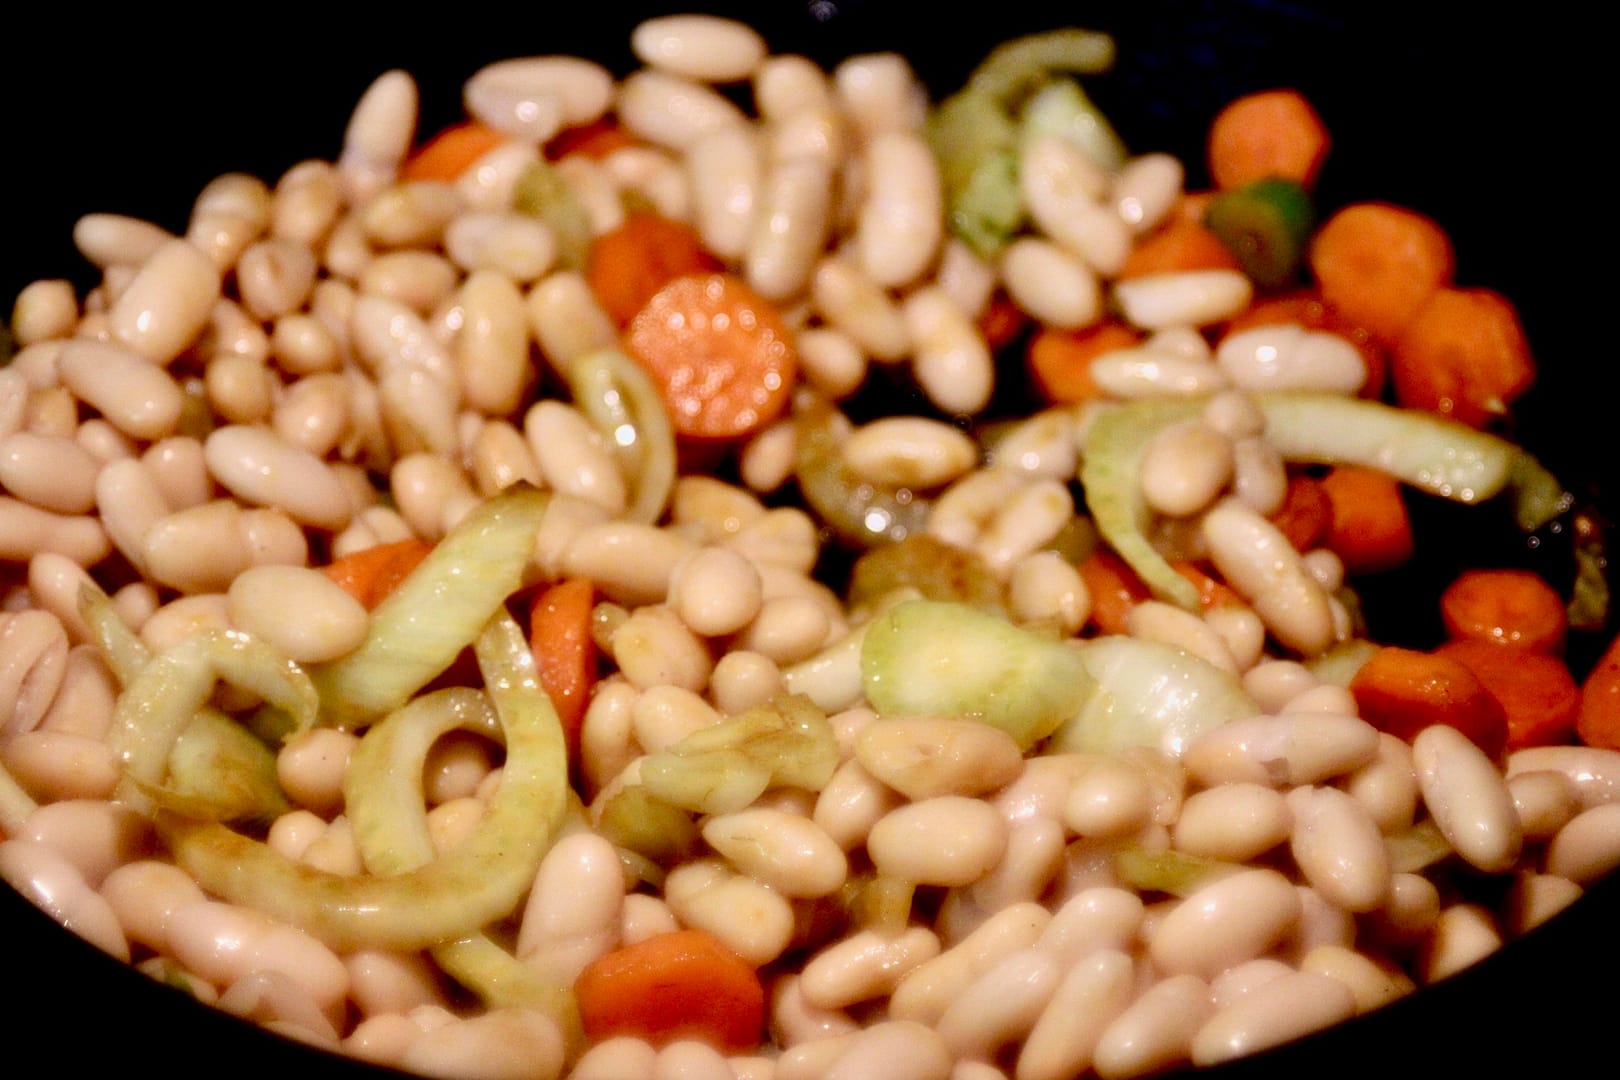 Beans and vegetables 